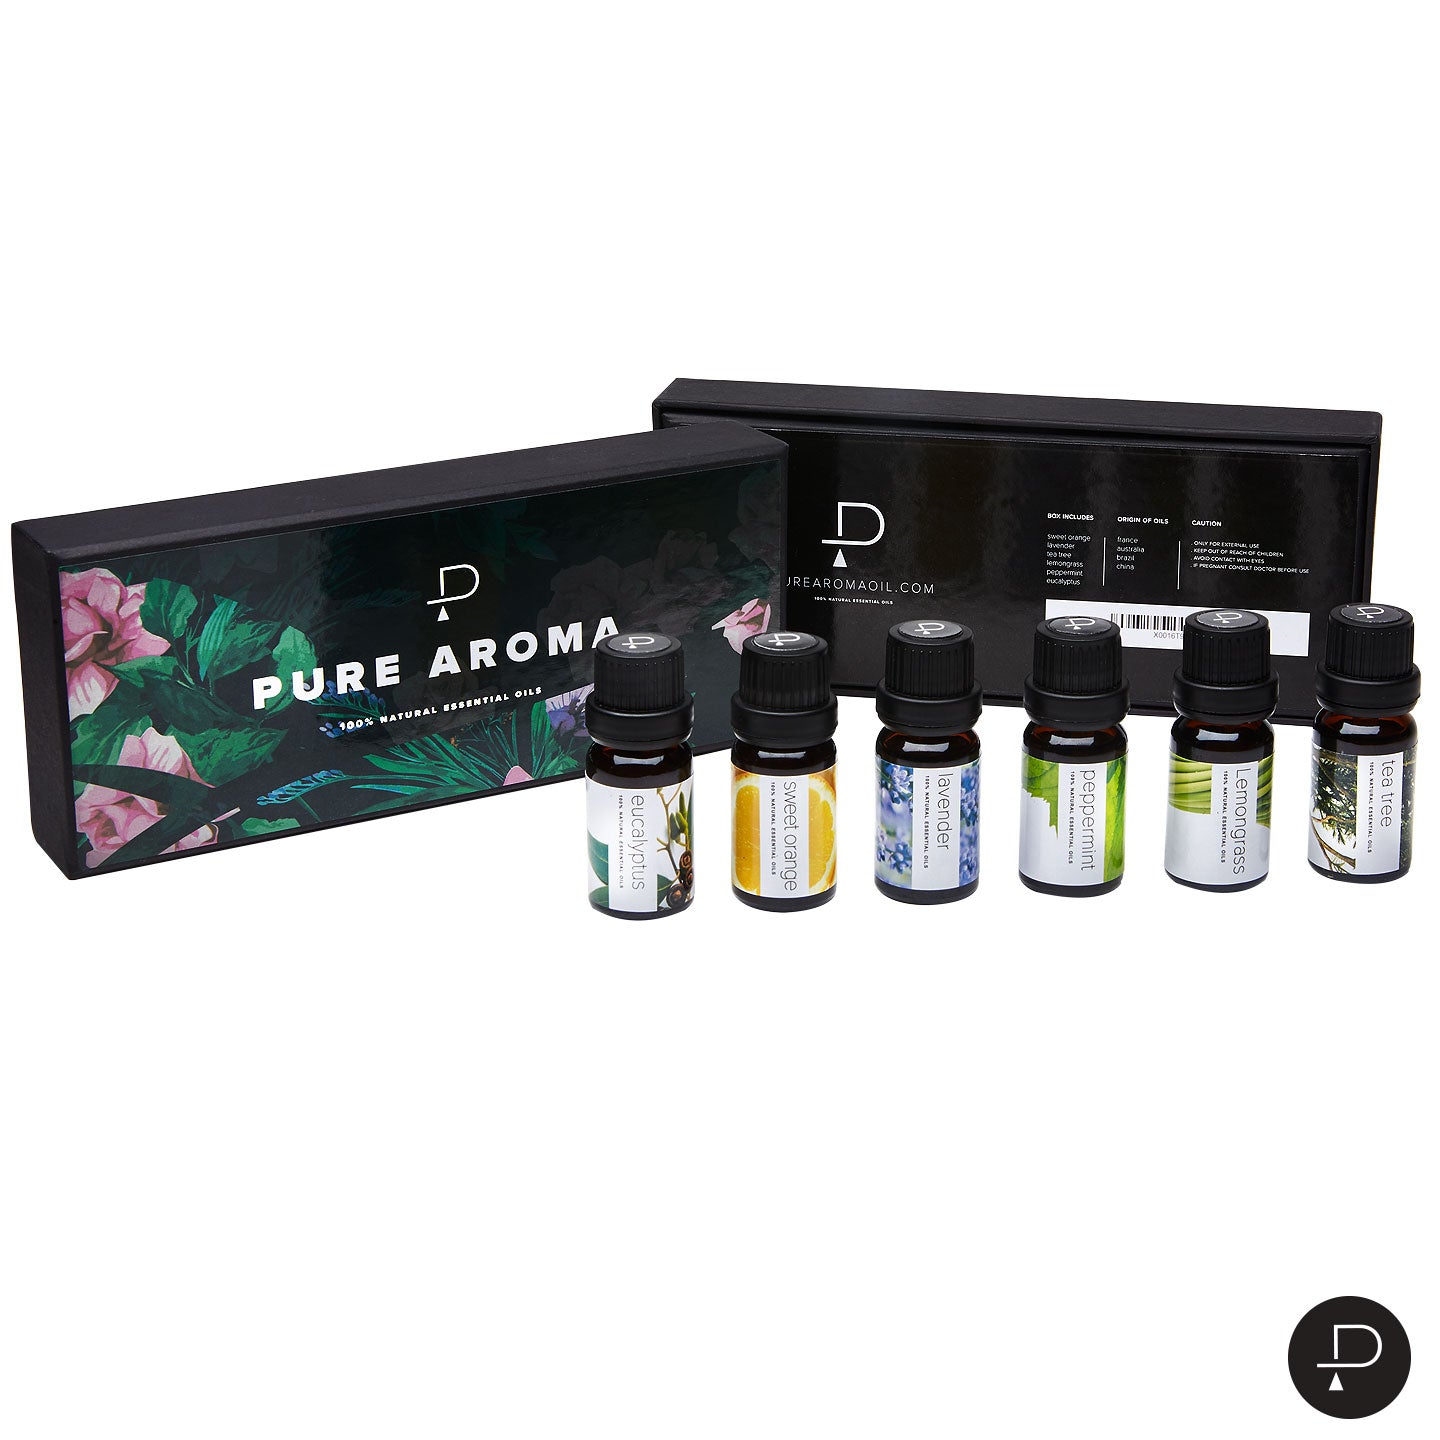 PURE AROMA Essential Oils - Top 6 Aromatherapy Oils in 1 Box (10 Ml) – Pure  Aroma